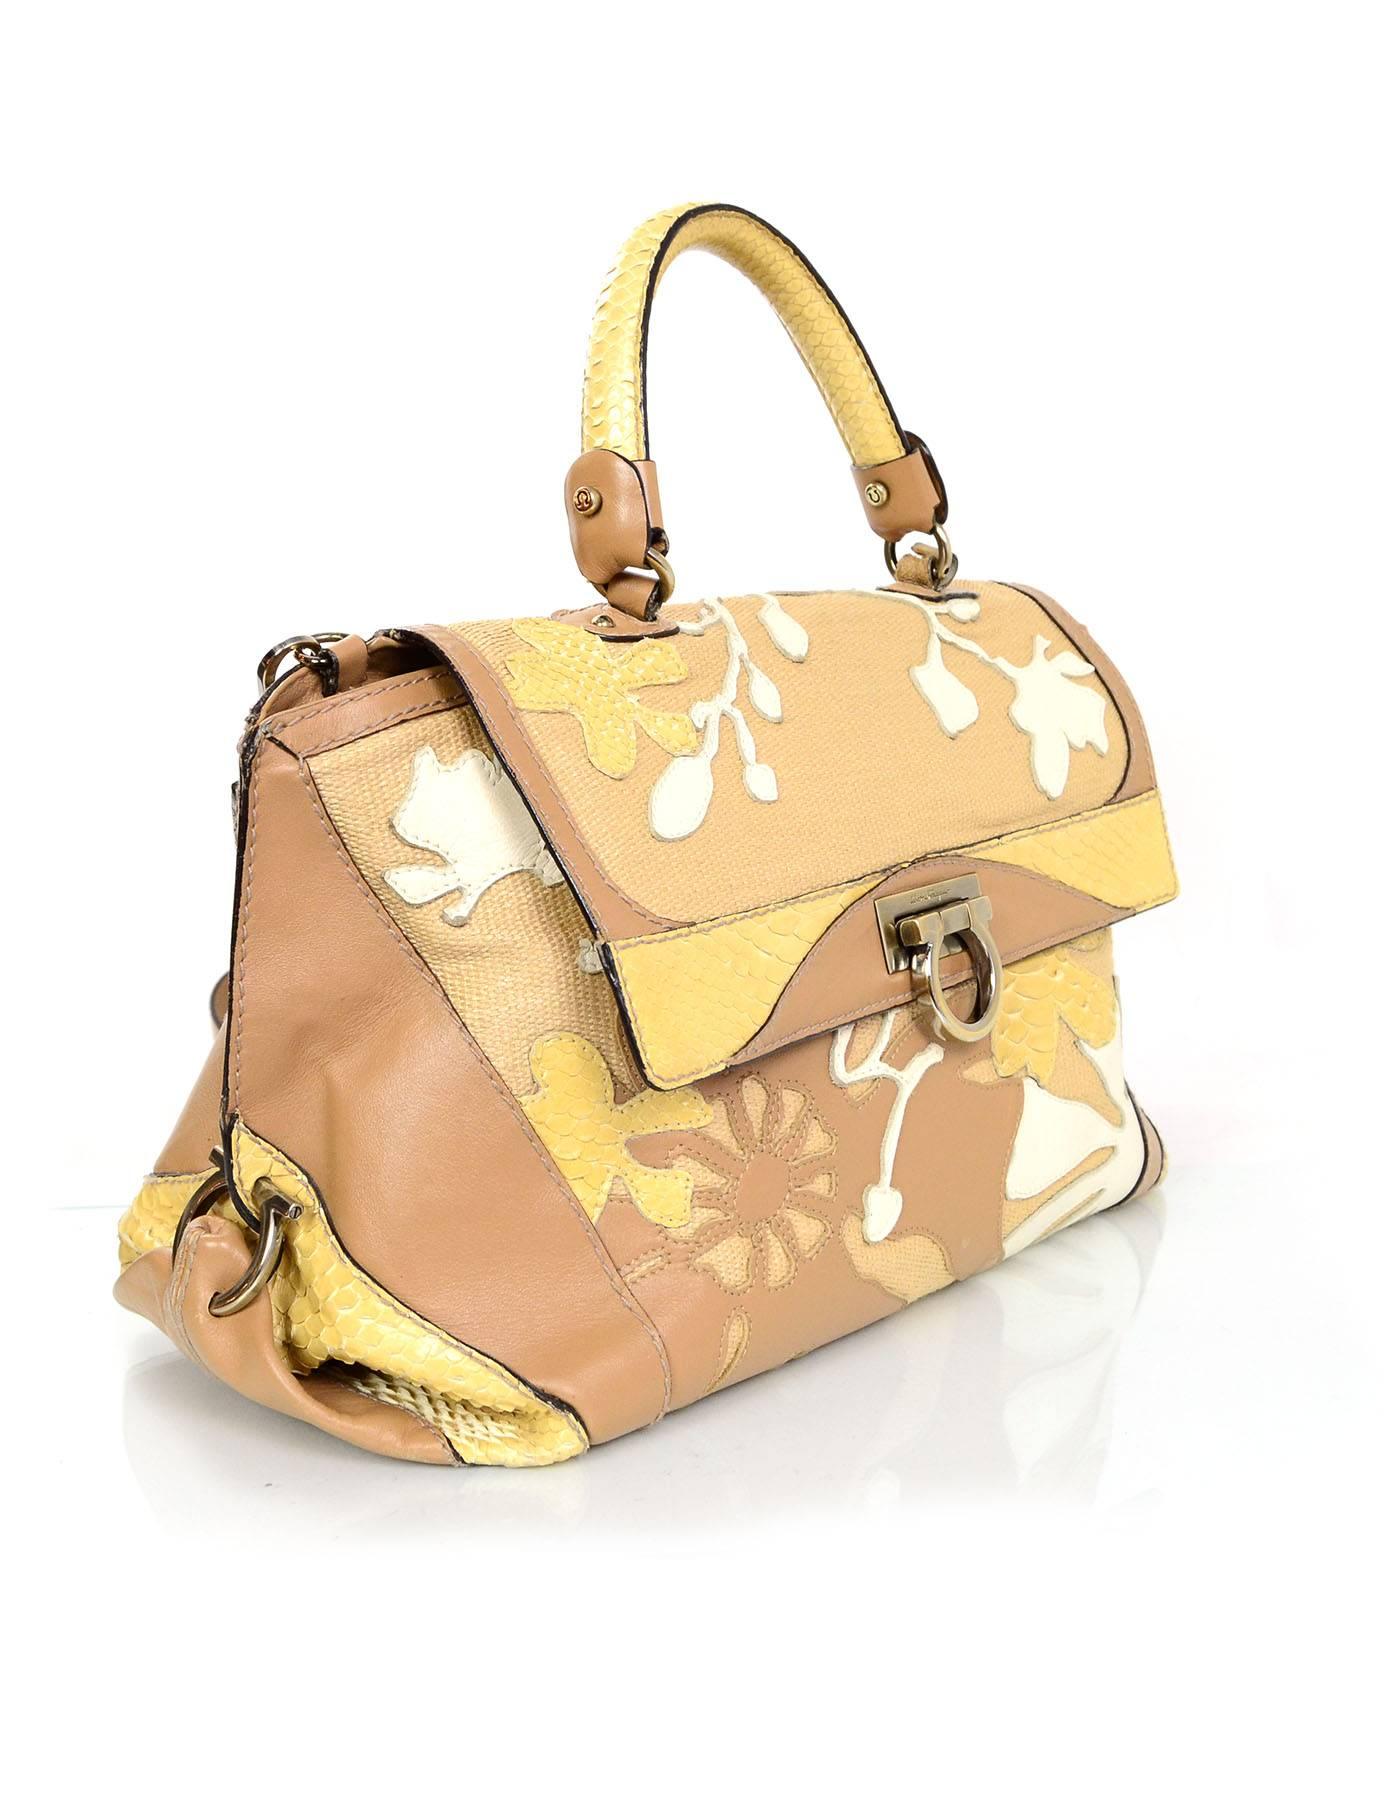 Salvatore Ferragamo Beige & Tan Sofia Satchel
Features flower and branch details stitched throughout
Made In: Italy
Color: Beige, tan and white
Hardware: Bronze
Materials: Leather, python, and woven canvas
Lining: Beige